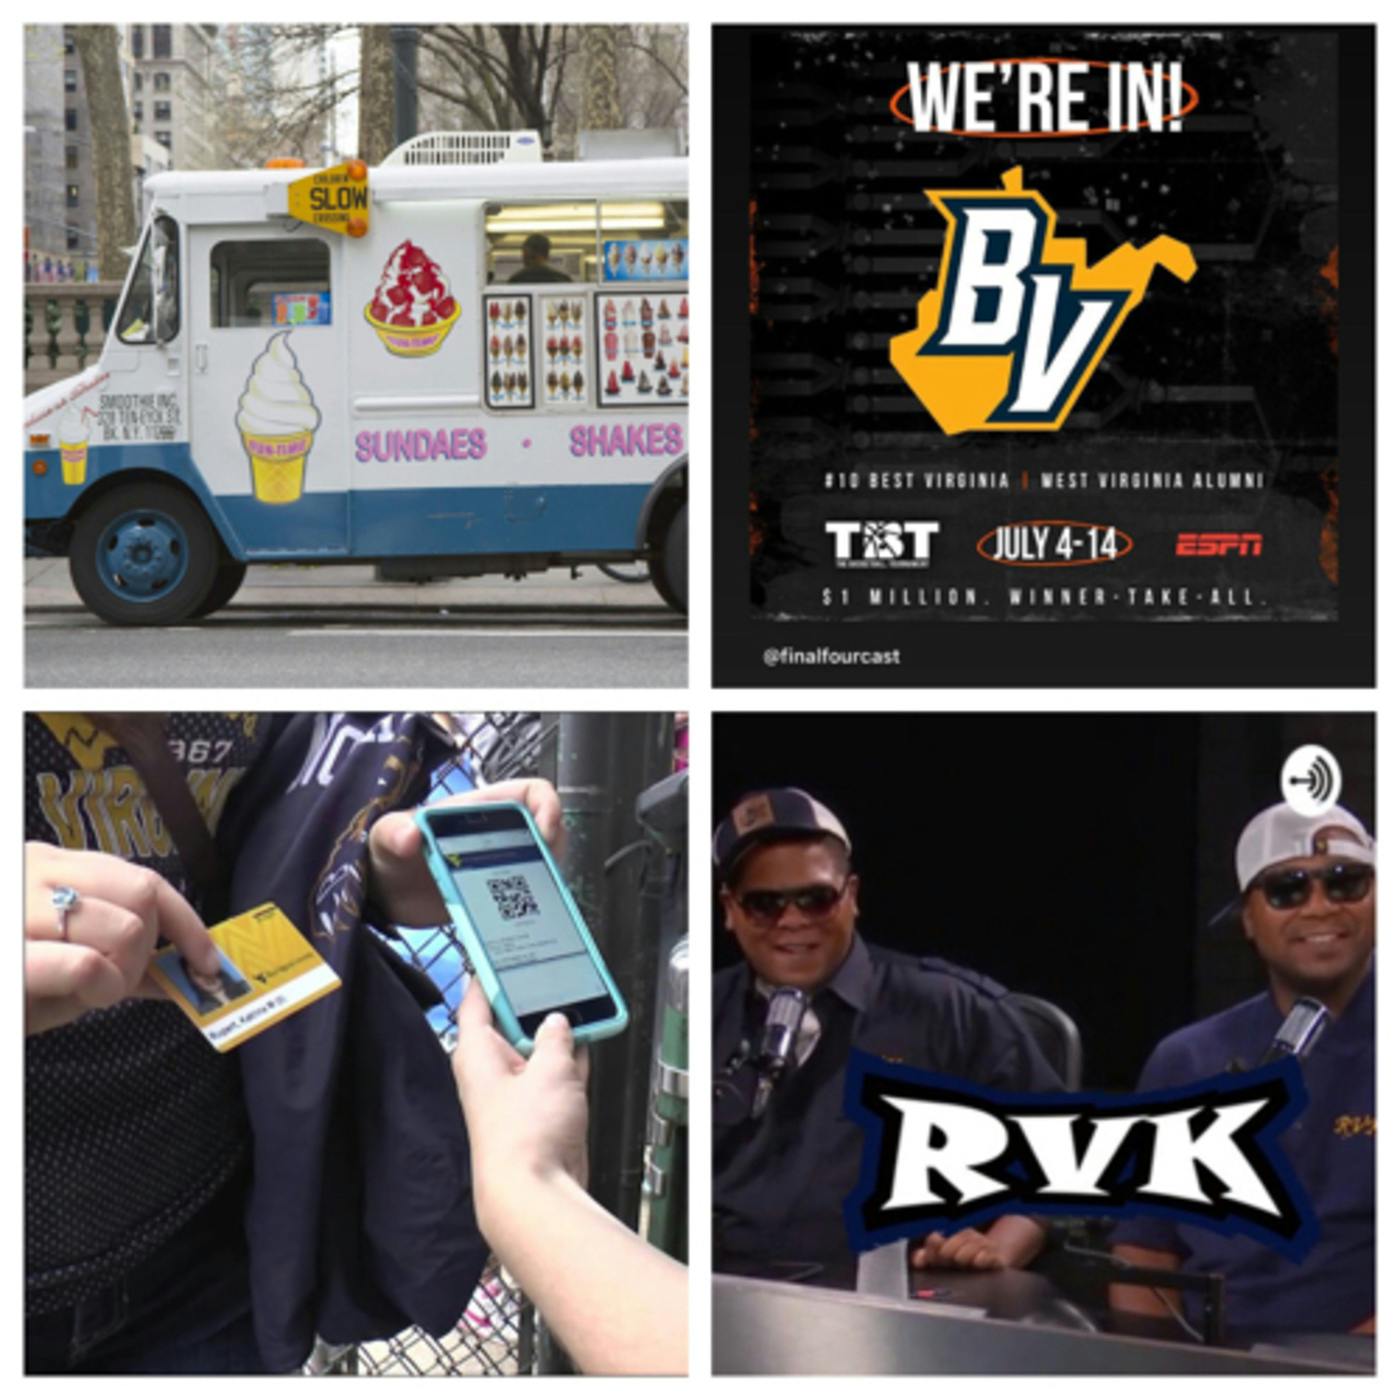 Ep. 165 - Ice Cream Truck, Best Virginia, Mobile Ticketing and more!